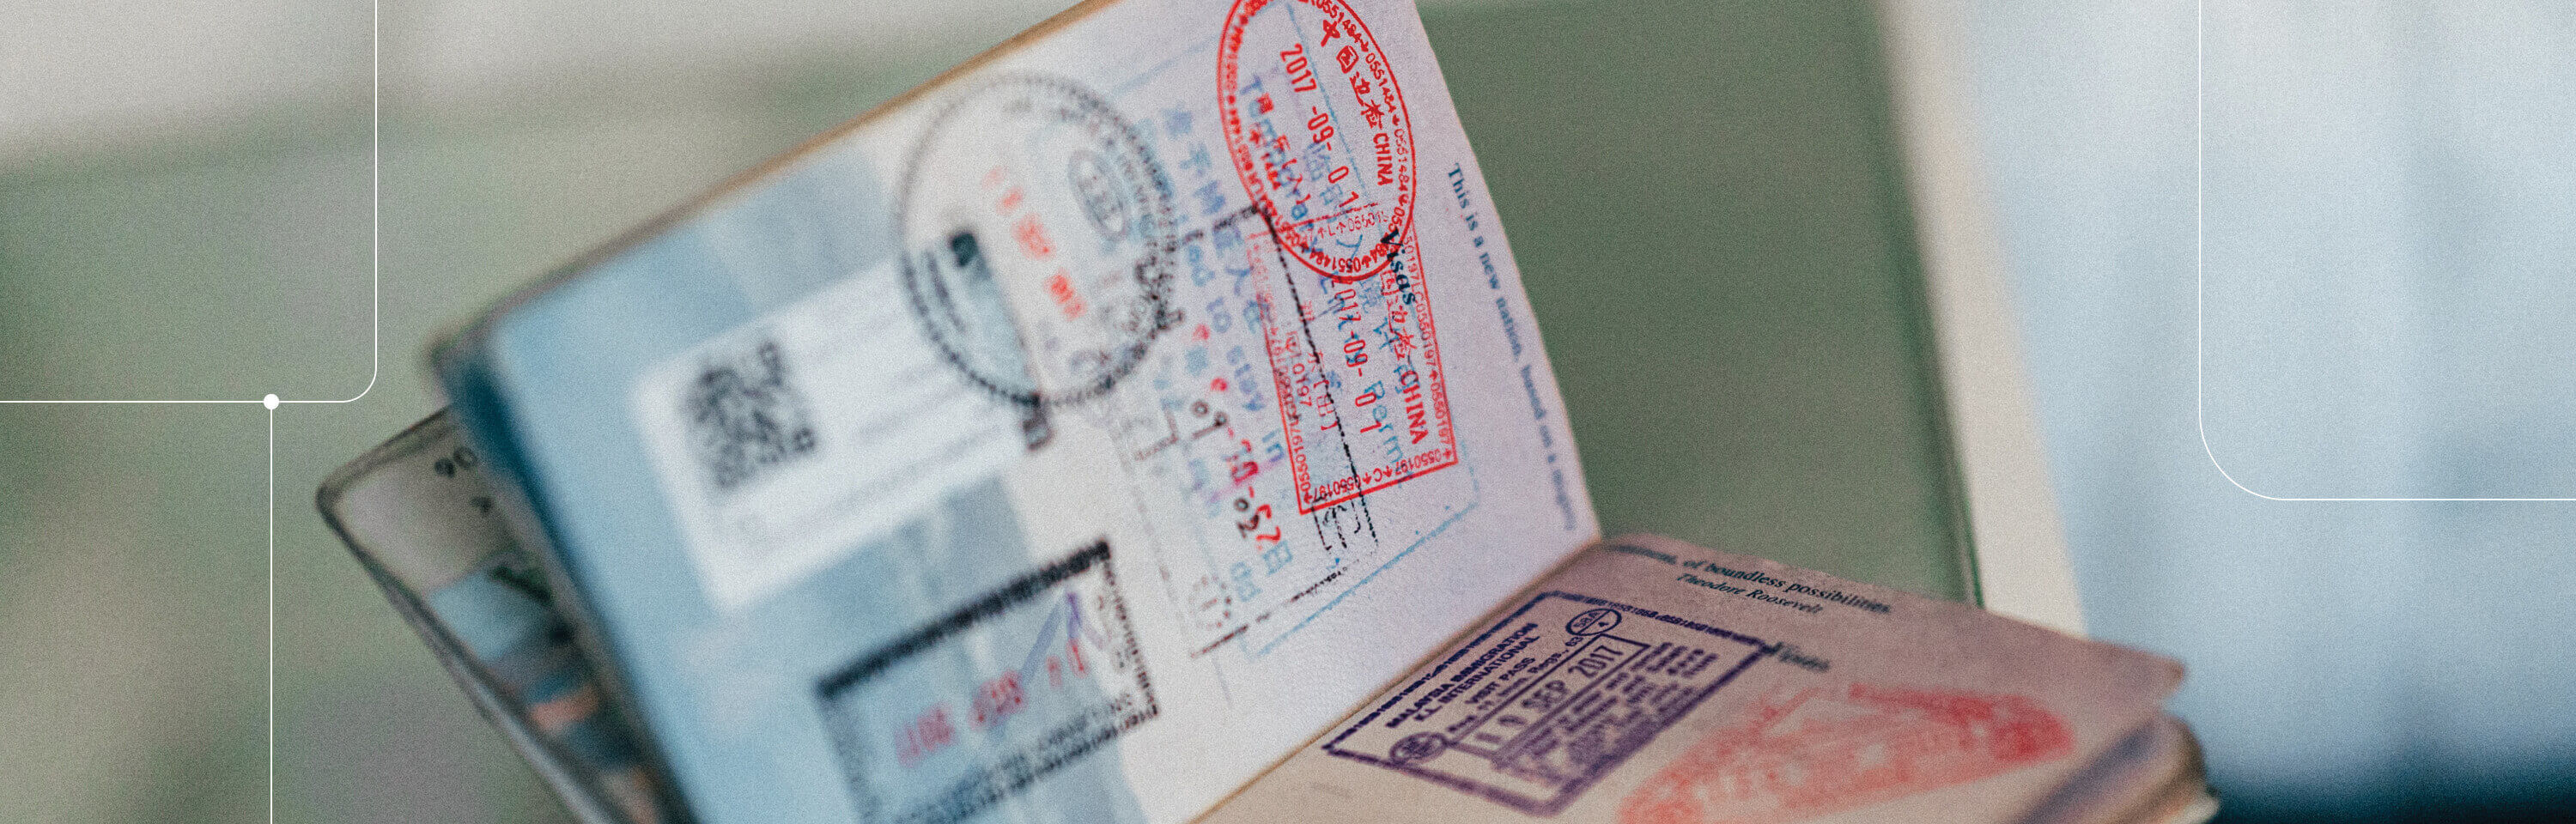 Close up view of a passport book with stamps